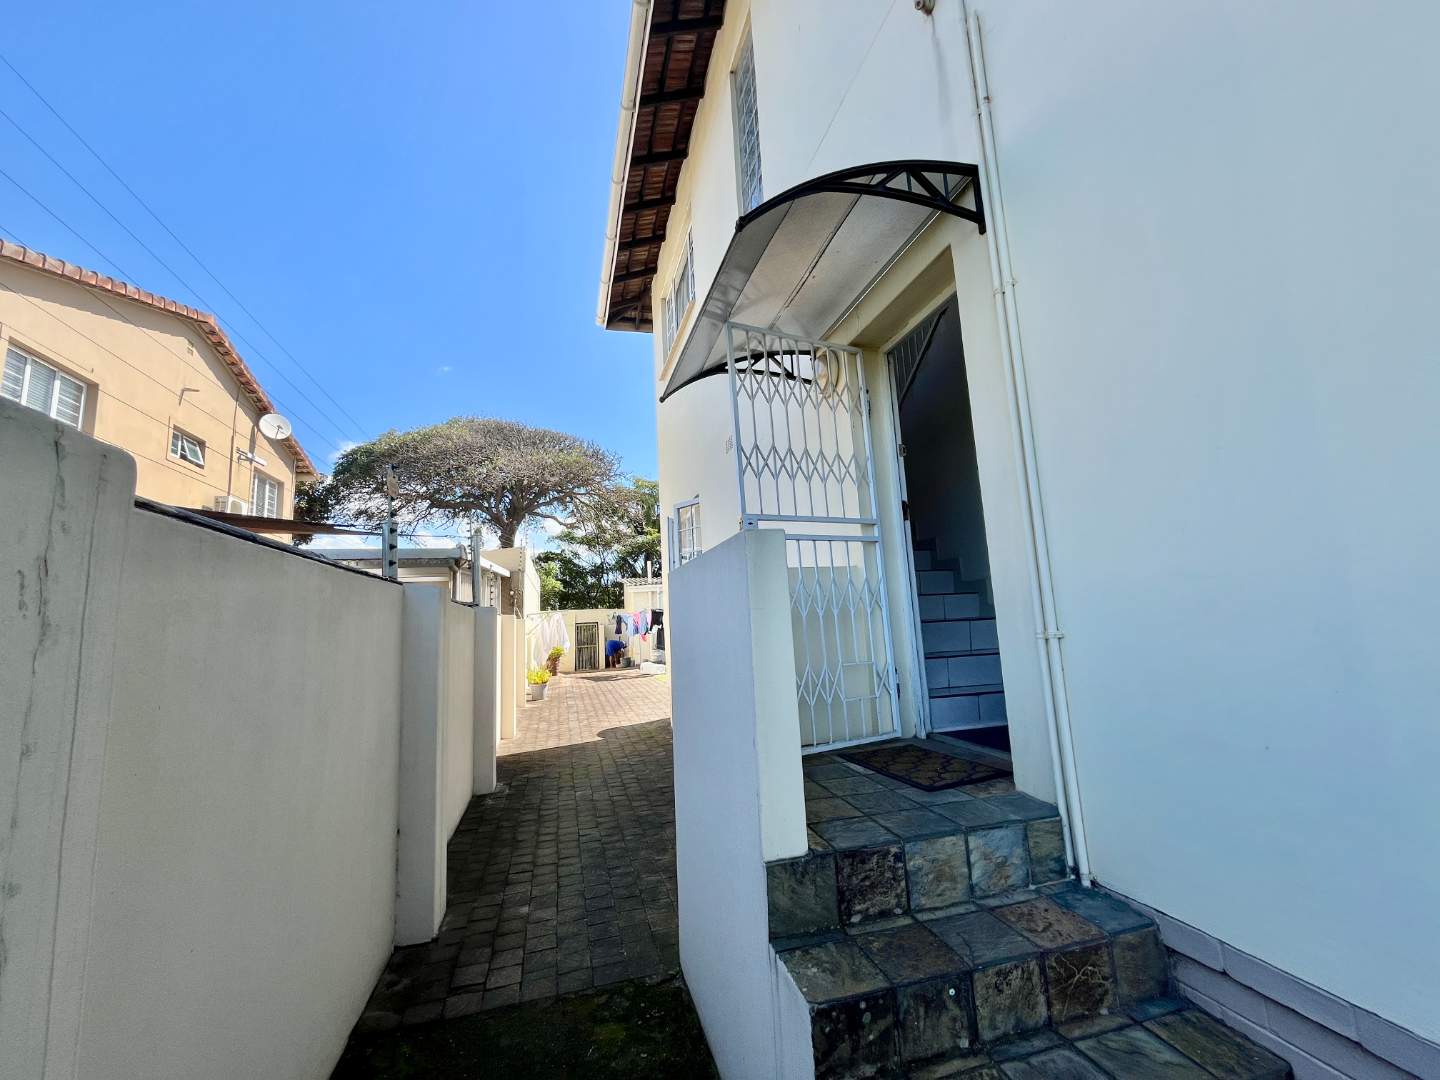 To Let 2 Bedroom Property for Rent in Durban North KwaZulu-Natal